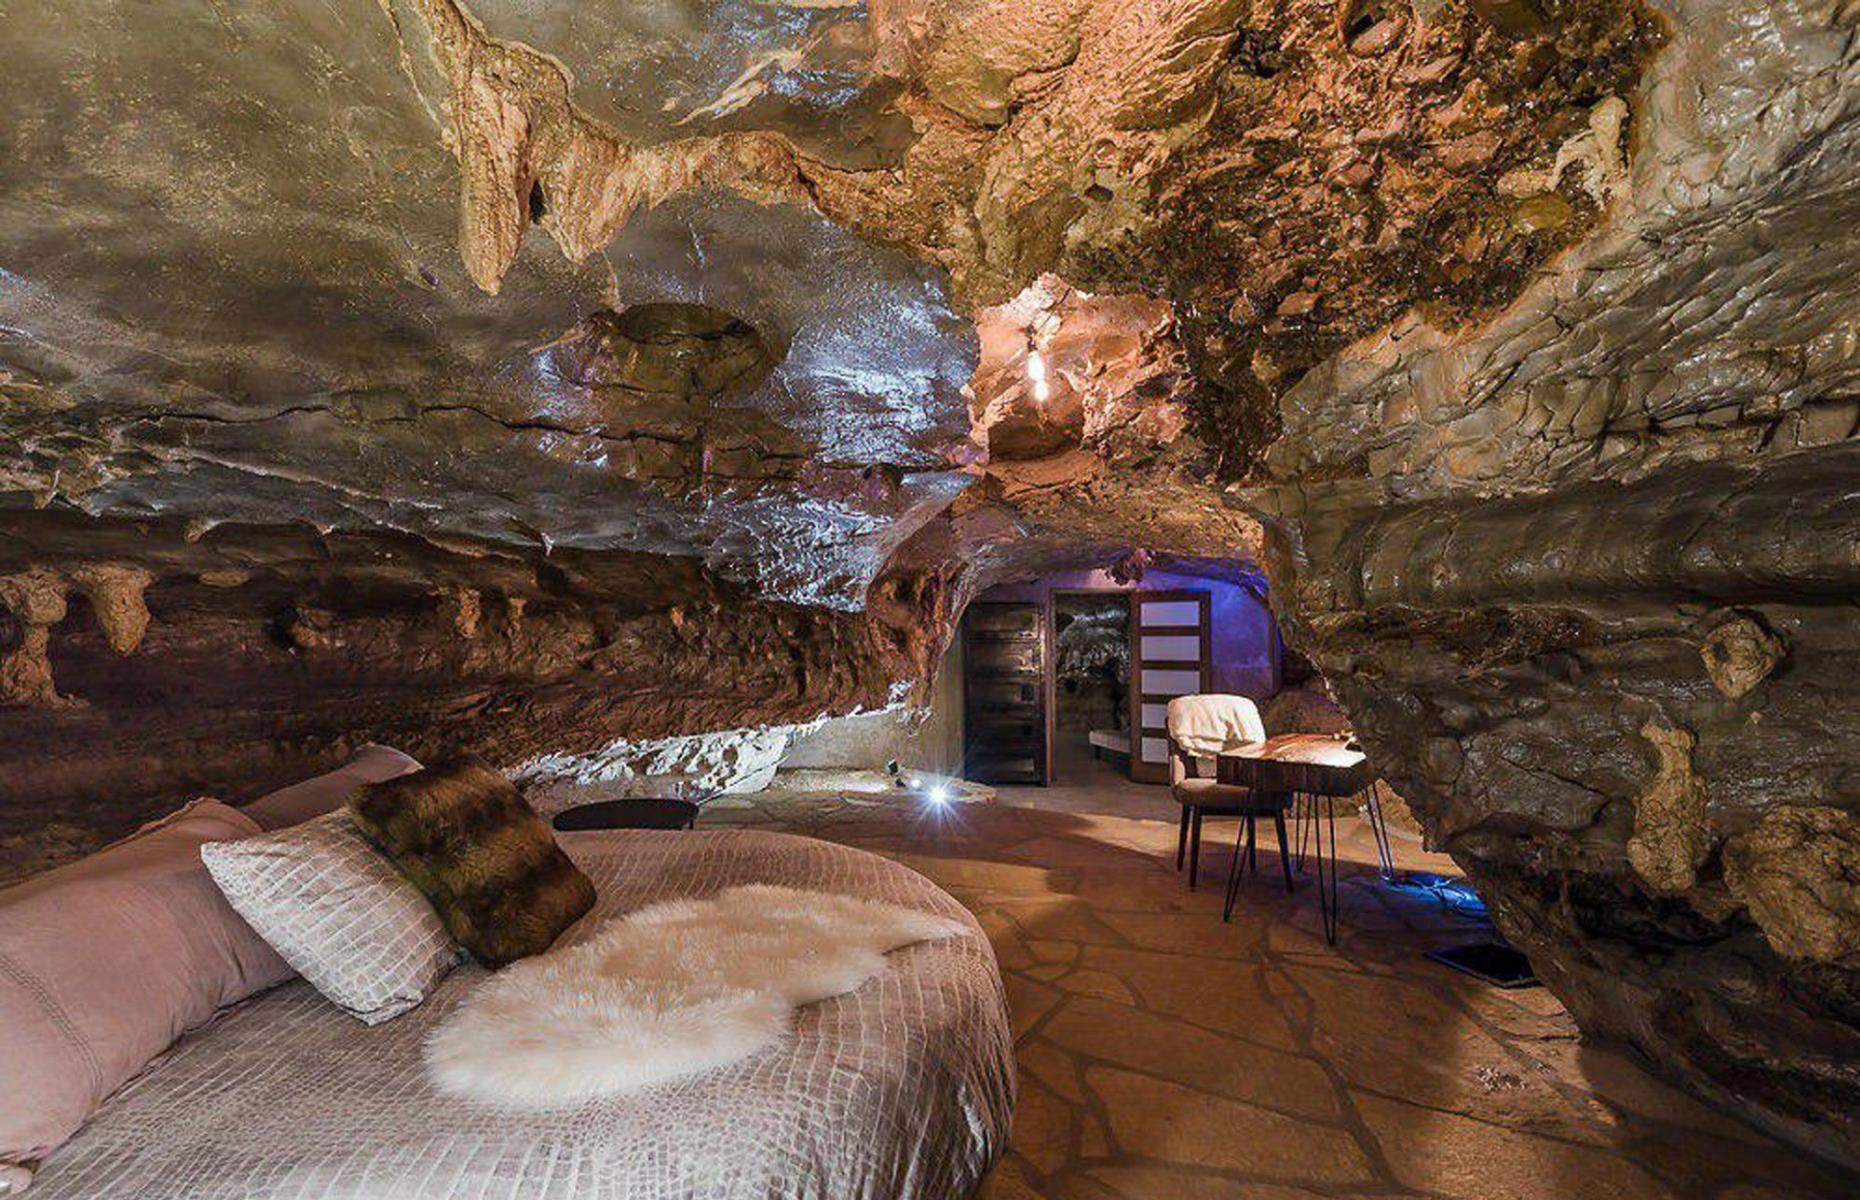 <p>Inside, the home boasts a unique natural aesthetic, with four bedrooms and four bathrooms. The cave can sleep up to 16 people at any one time, offering the ideal space for you and your family to hide out. With almost 6,000 square feet of interior space, you'll never feel overcrowded in this luxury abode.</p>